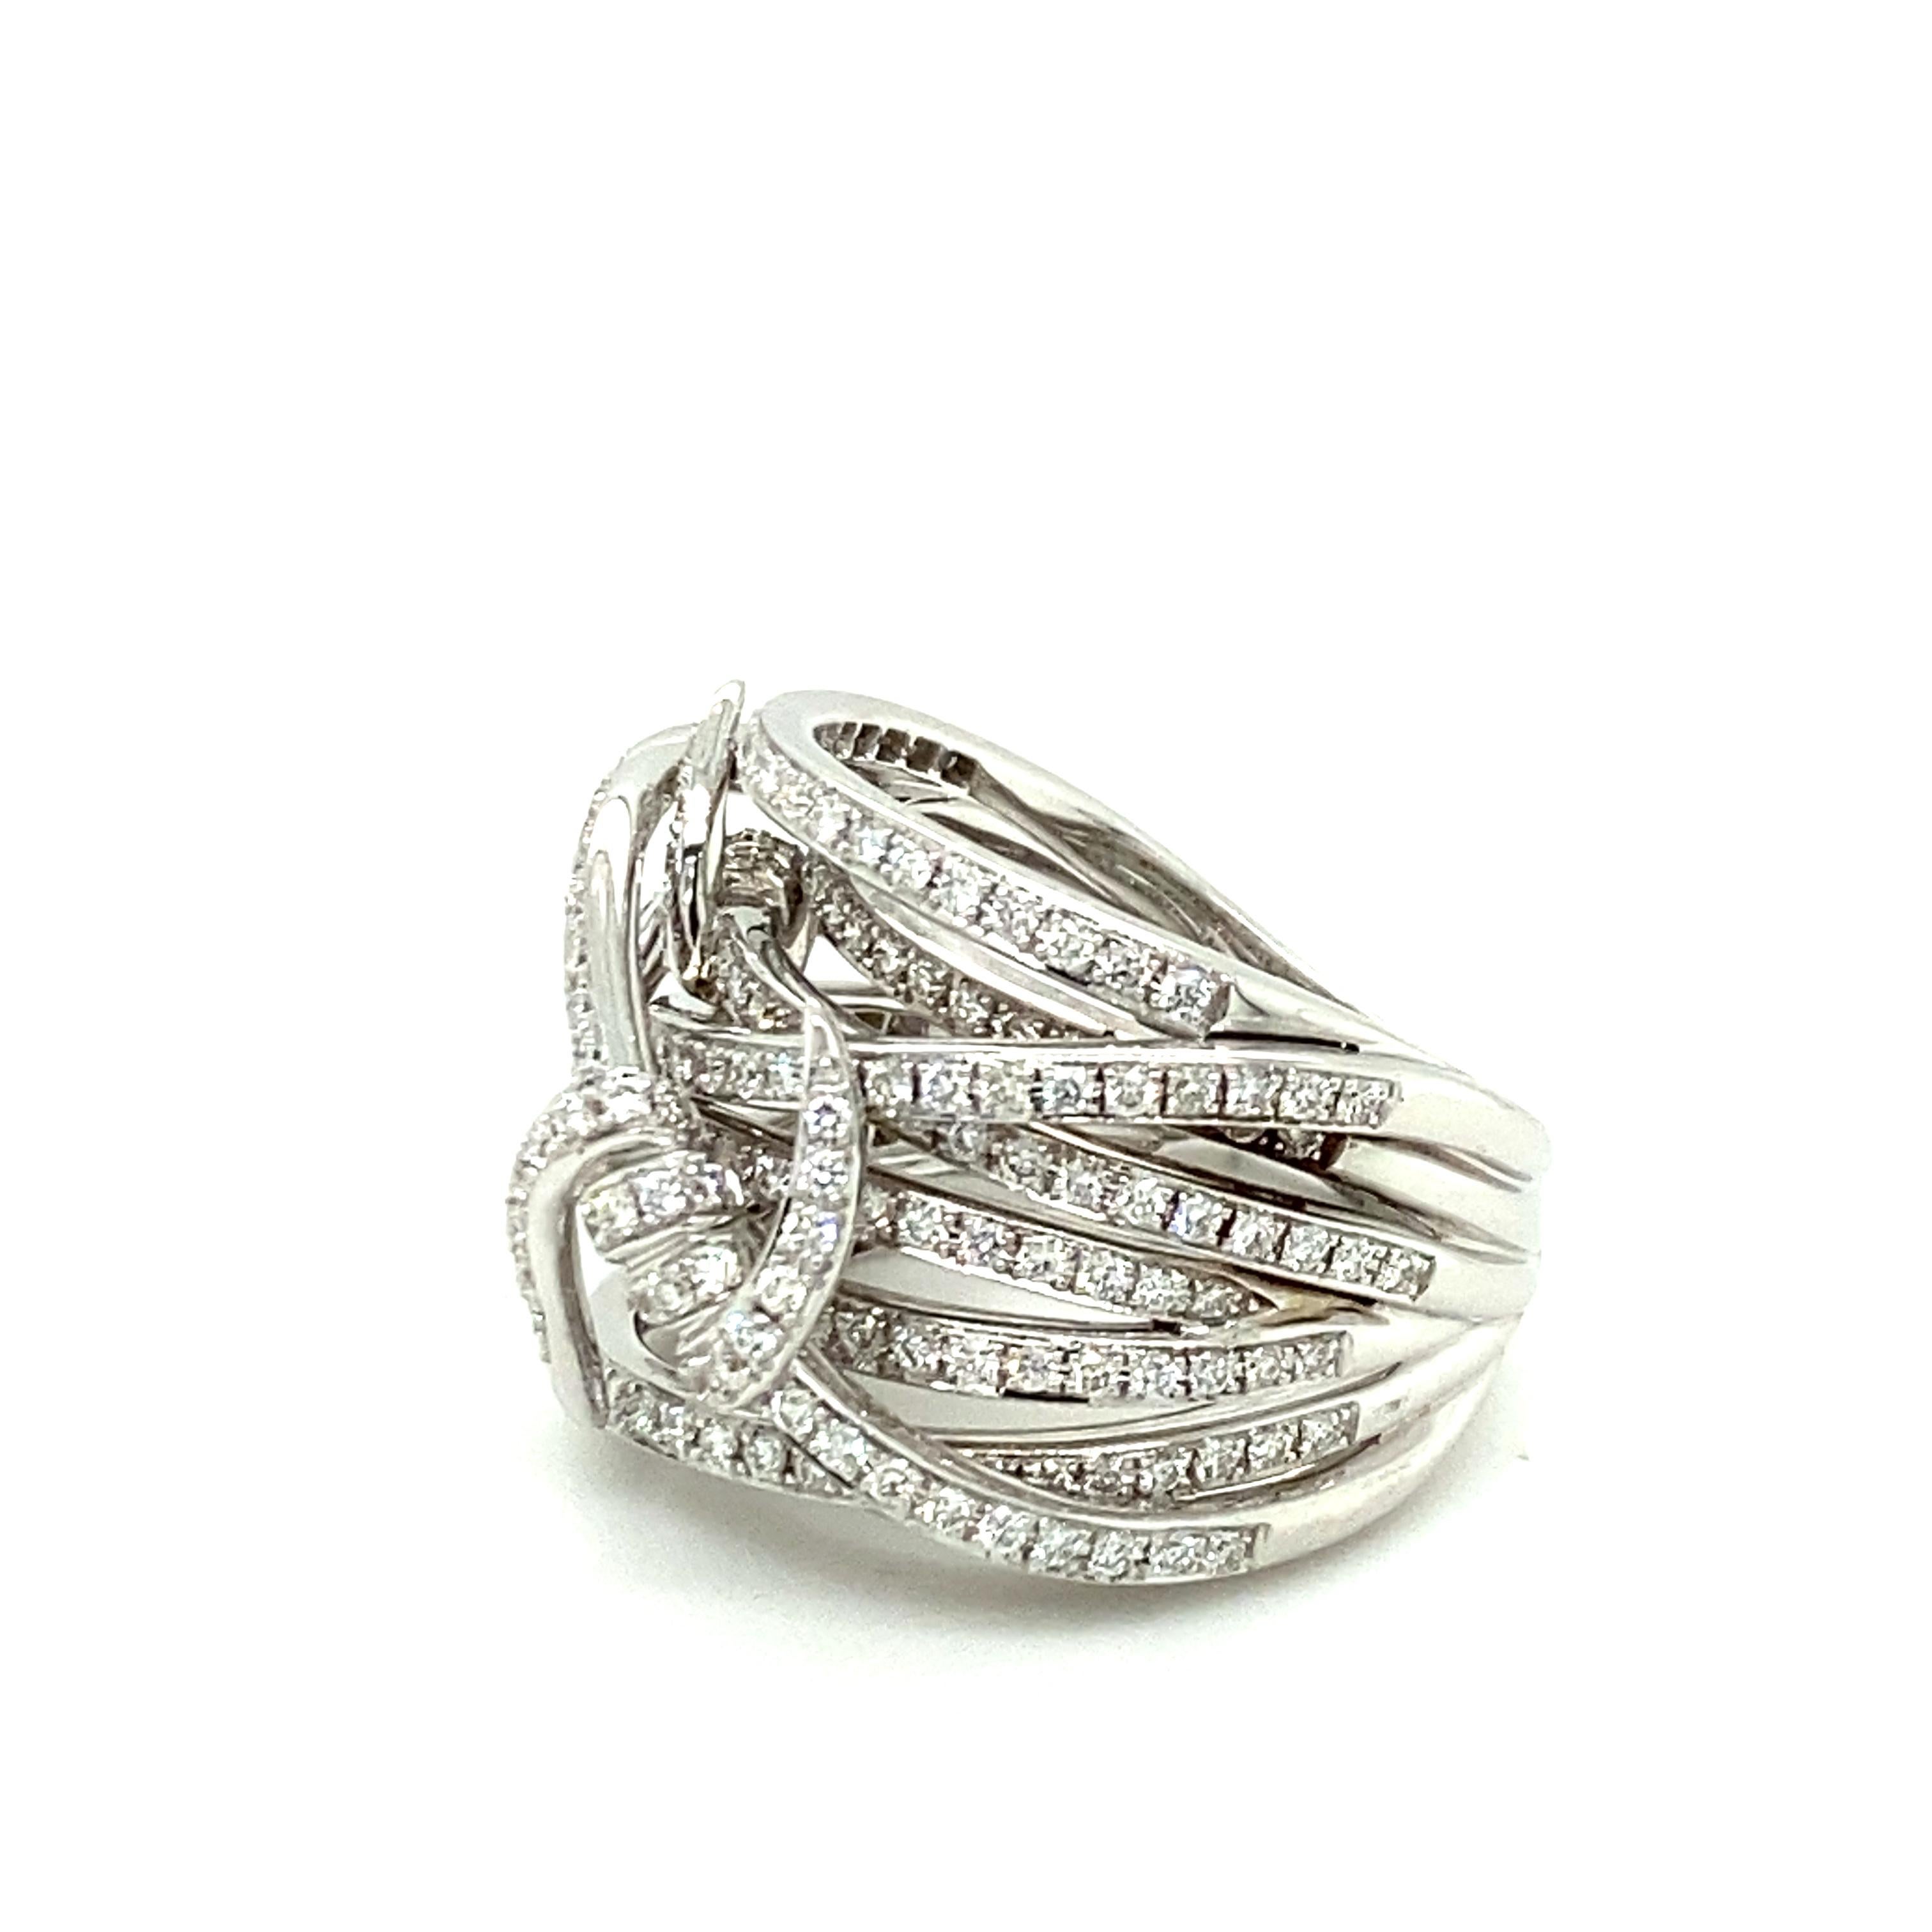 Women's or Men's Stephen Webster Thorn Bandeau Ring with Diamonds in 18 Karat White Gold